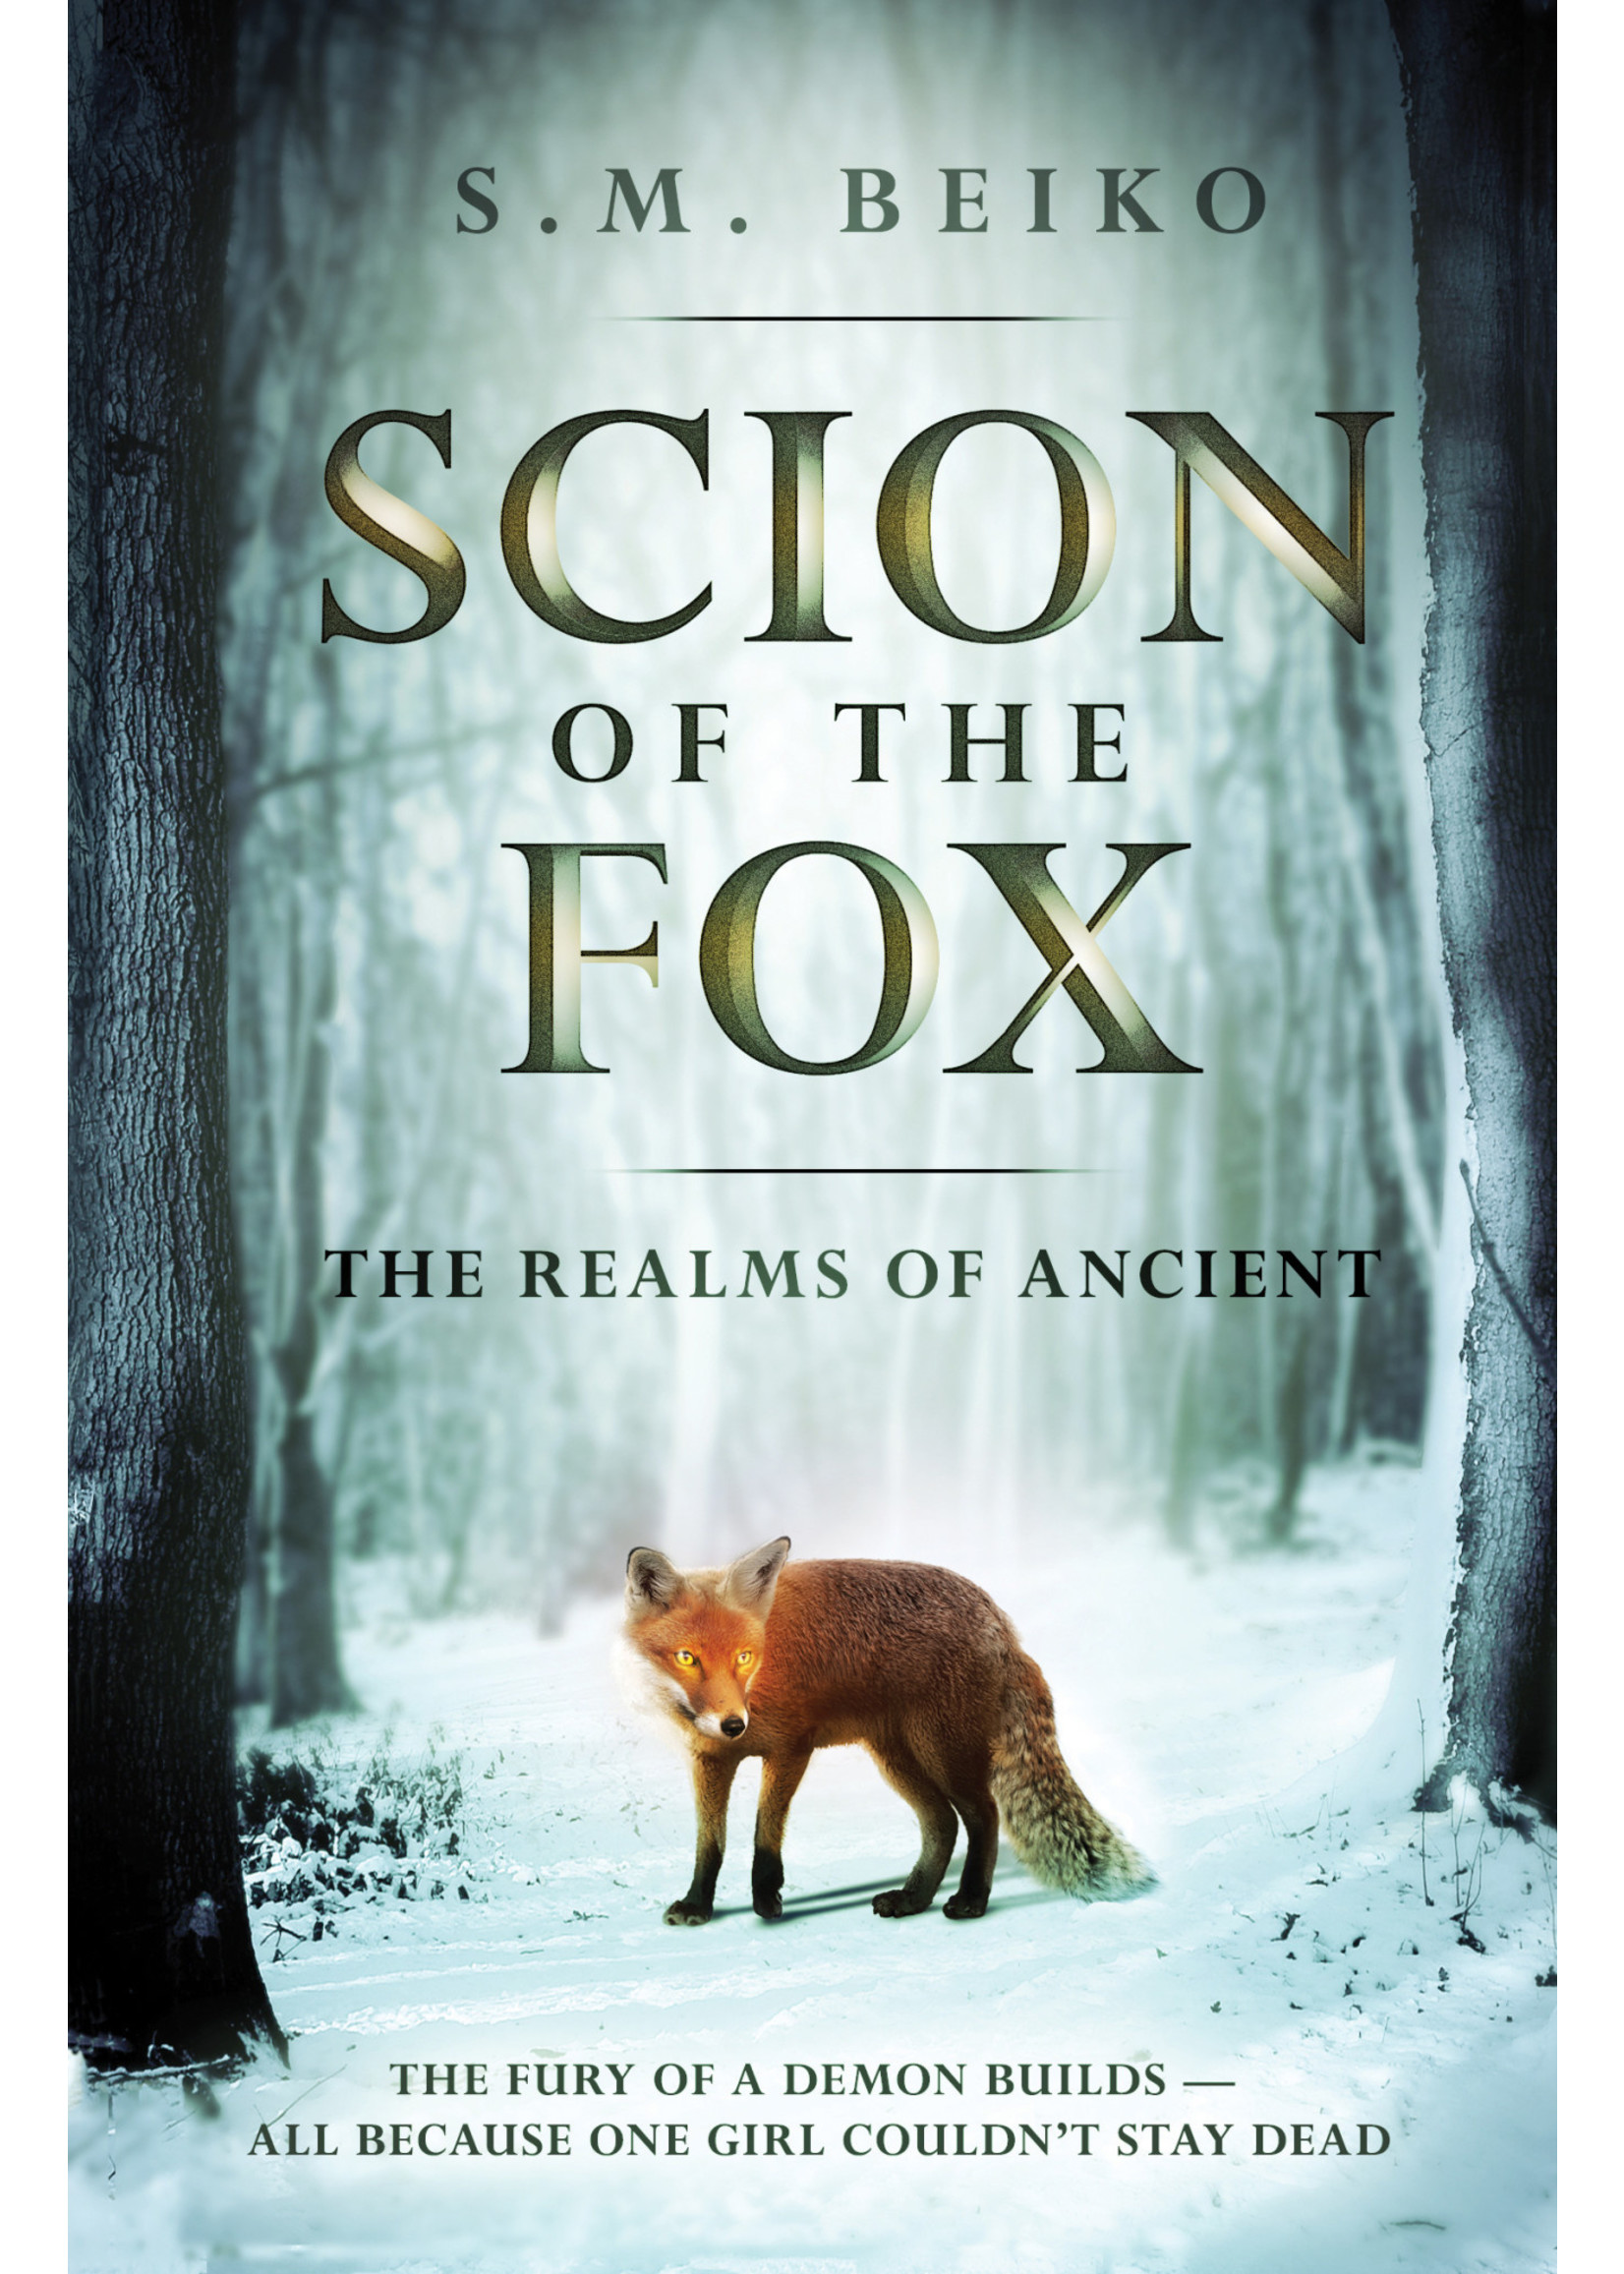 Scion of the Fox (The Realms of Ancient #1) by S. M. Beiko